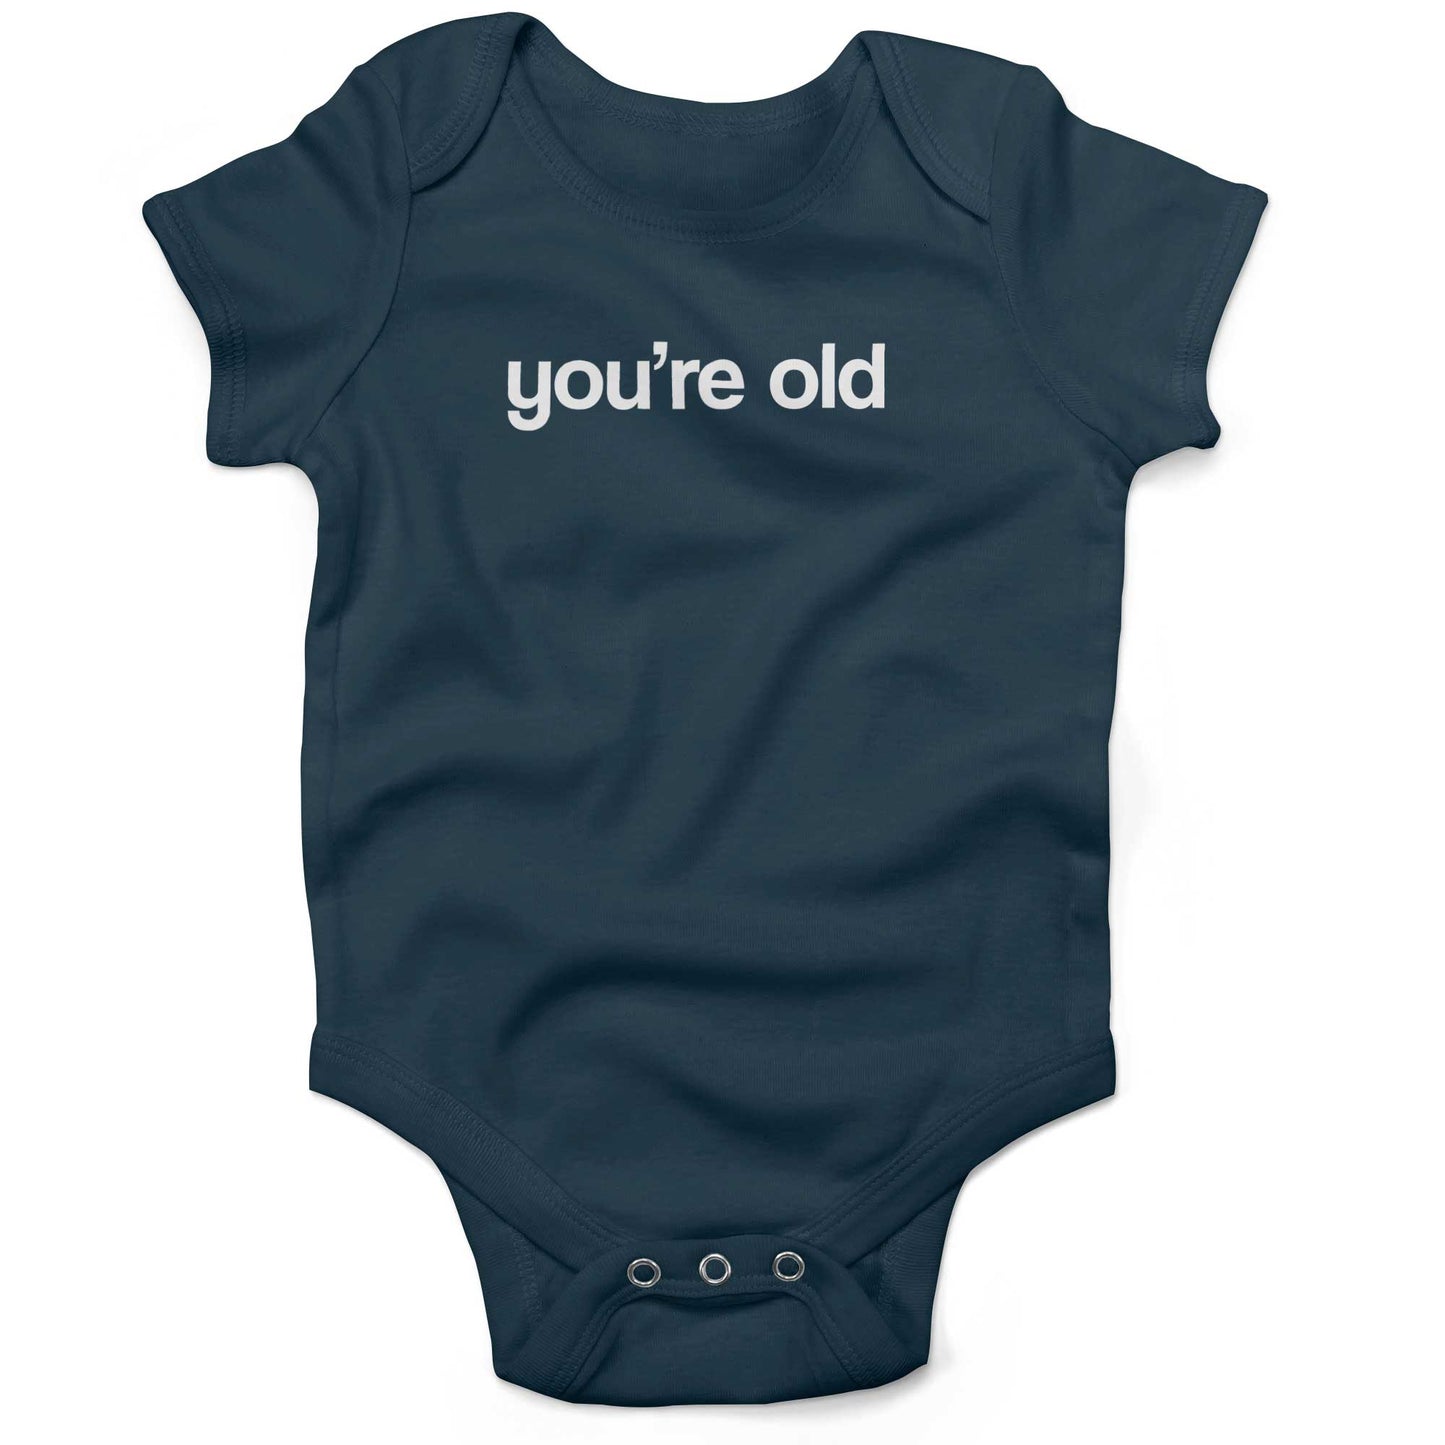 You're Old Infant Bodysuit or Raglan Tee-Organic Pacific Blue-3-6 months